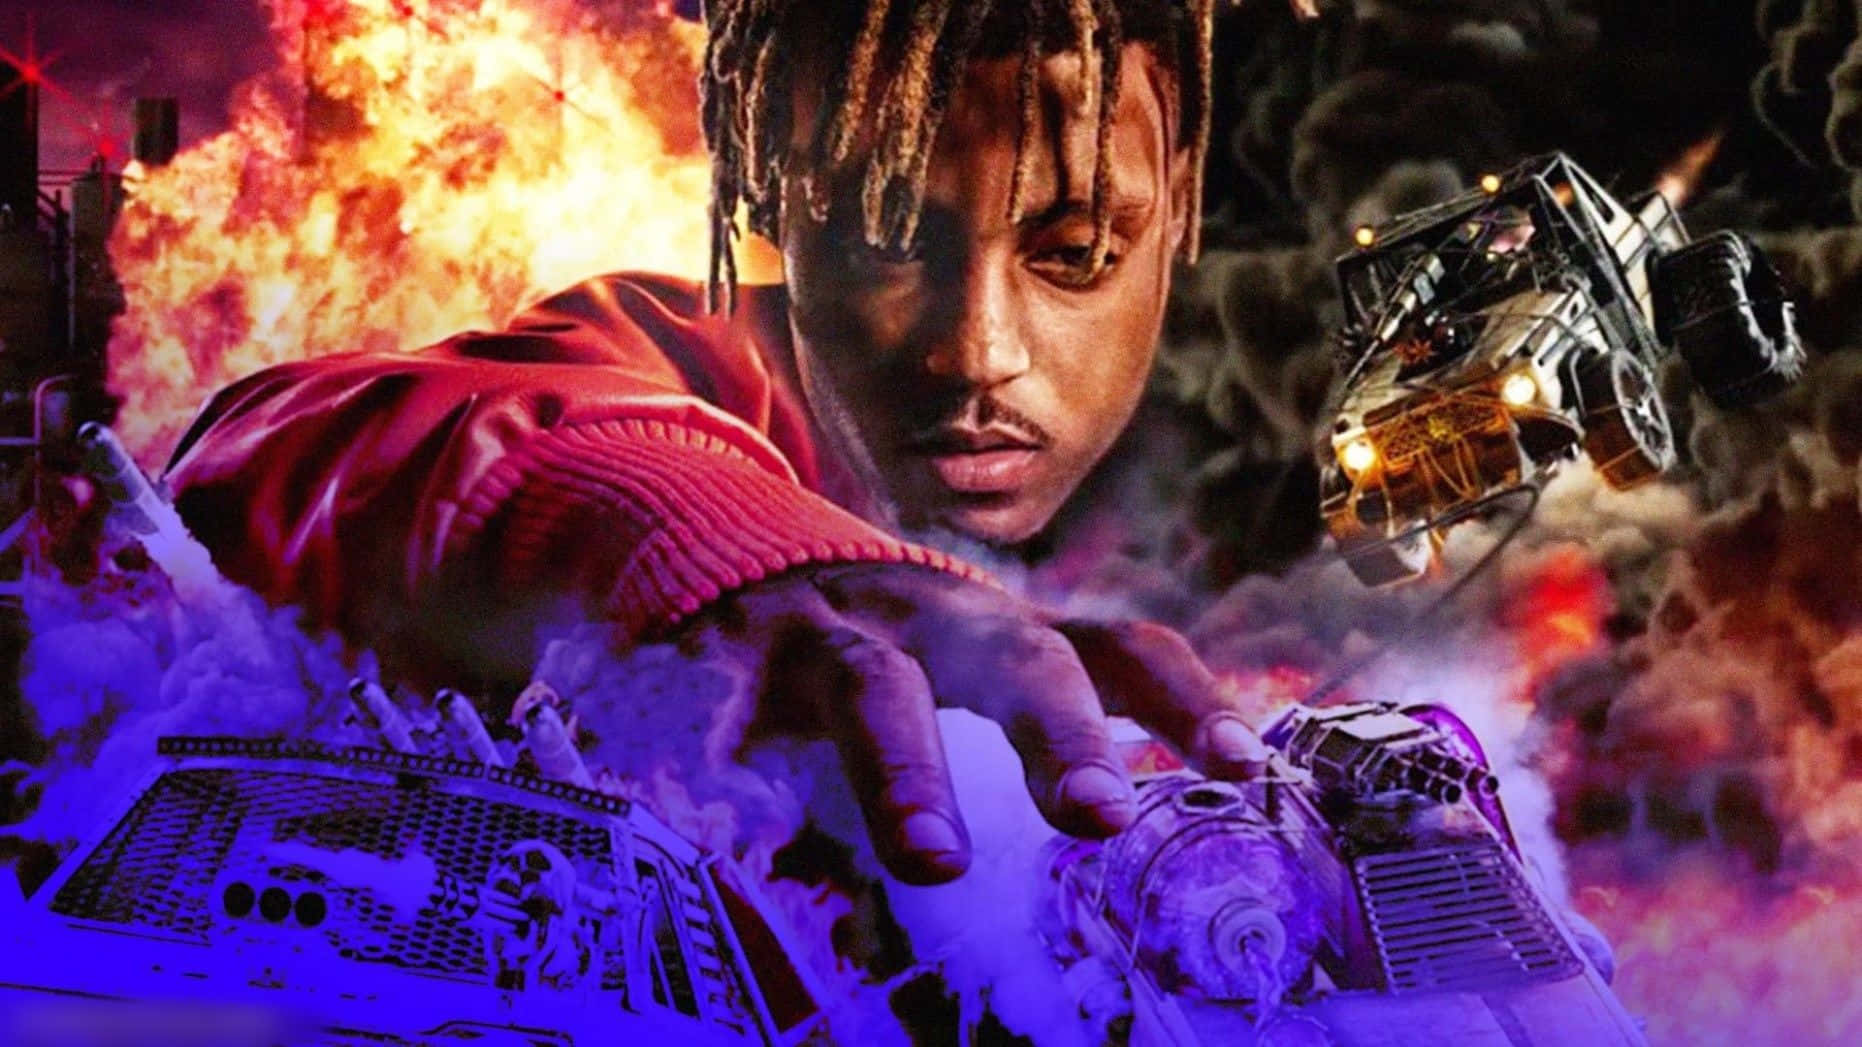 Singer Juice Wrld performing on stage in sold out stadium